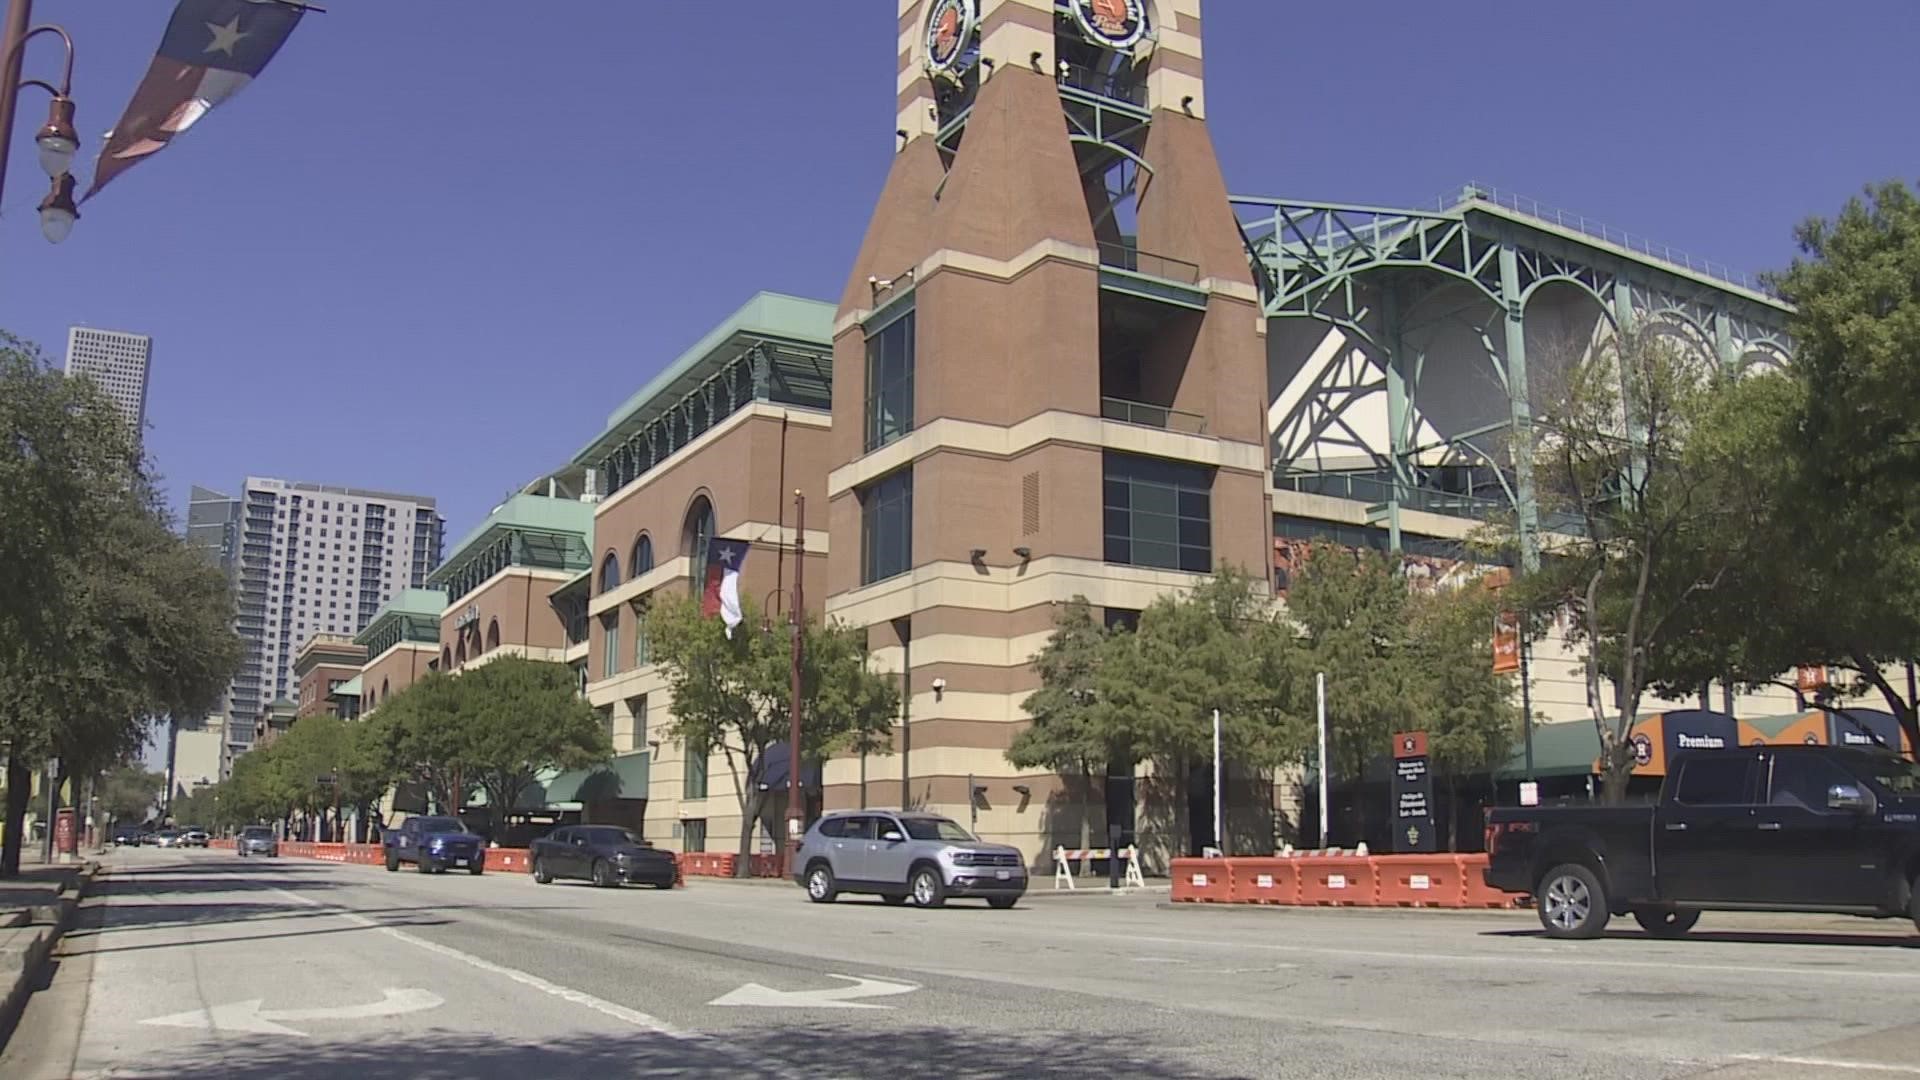 Houston police and public safety officials rolled out security plans including extra officers and major road closures around Minute Maid Park.